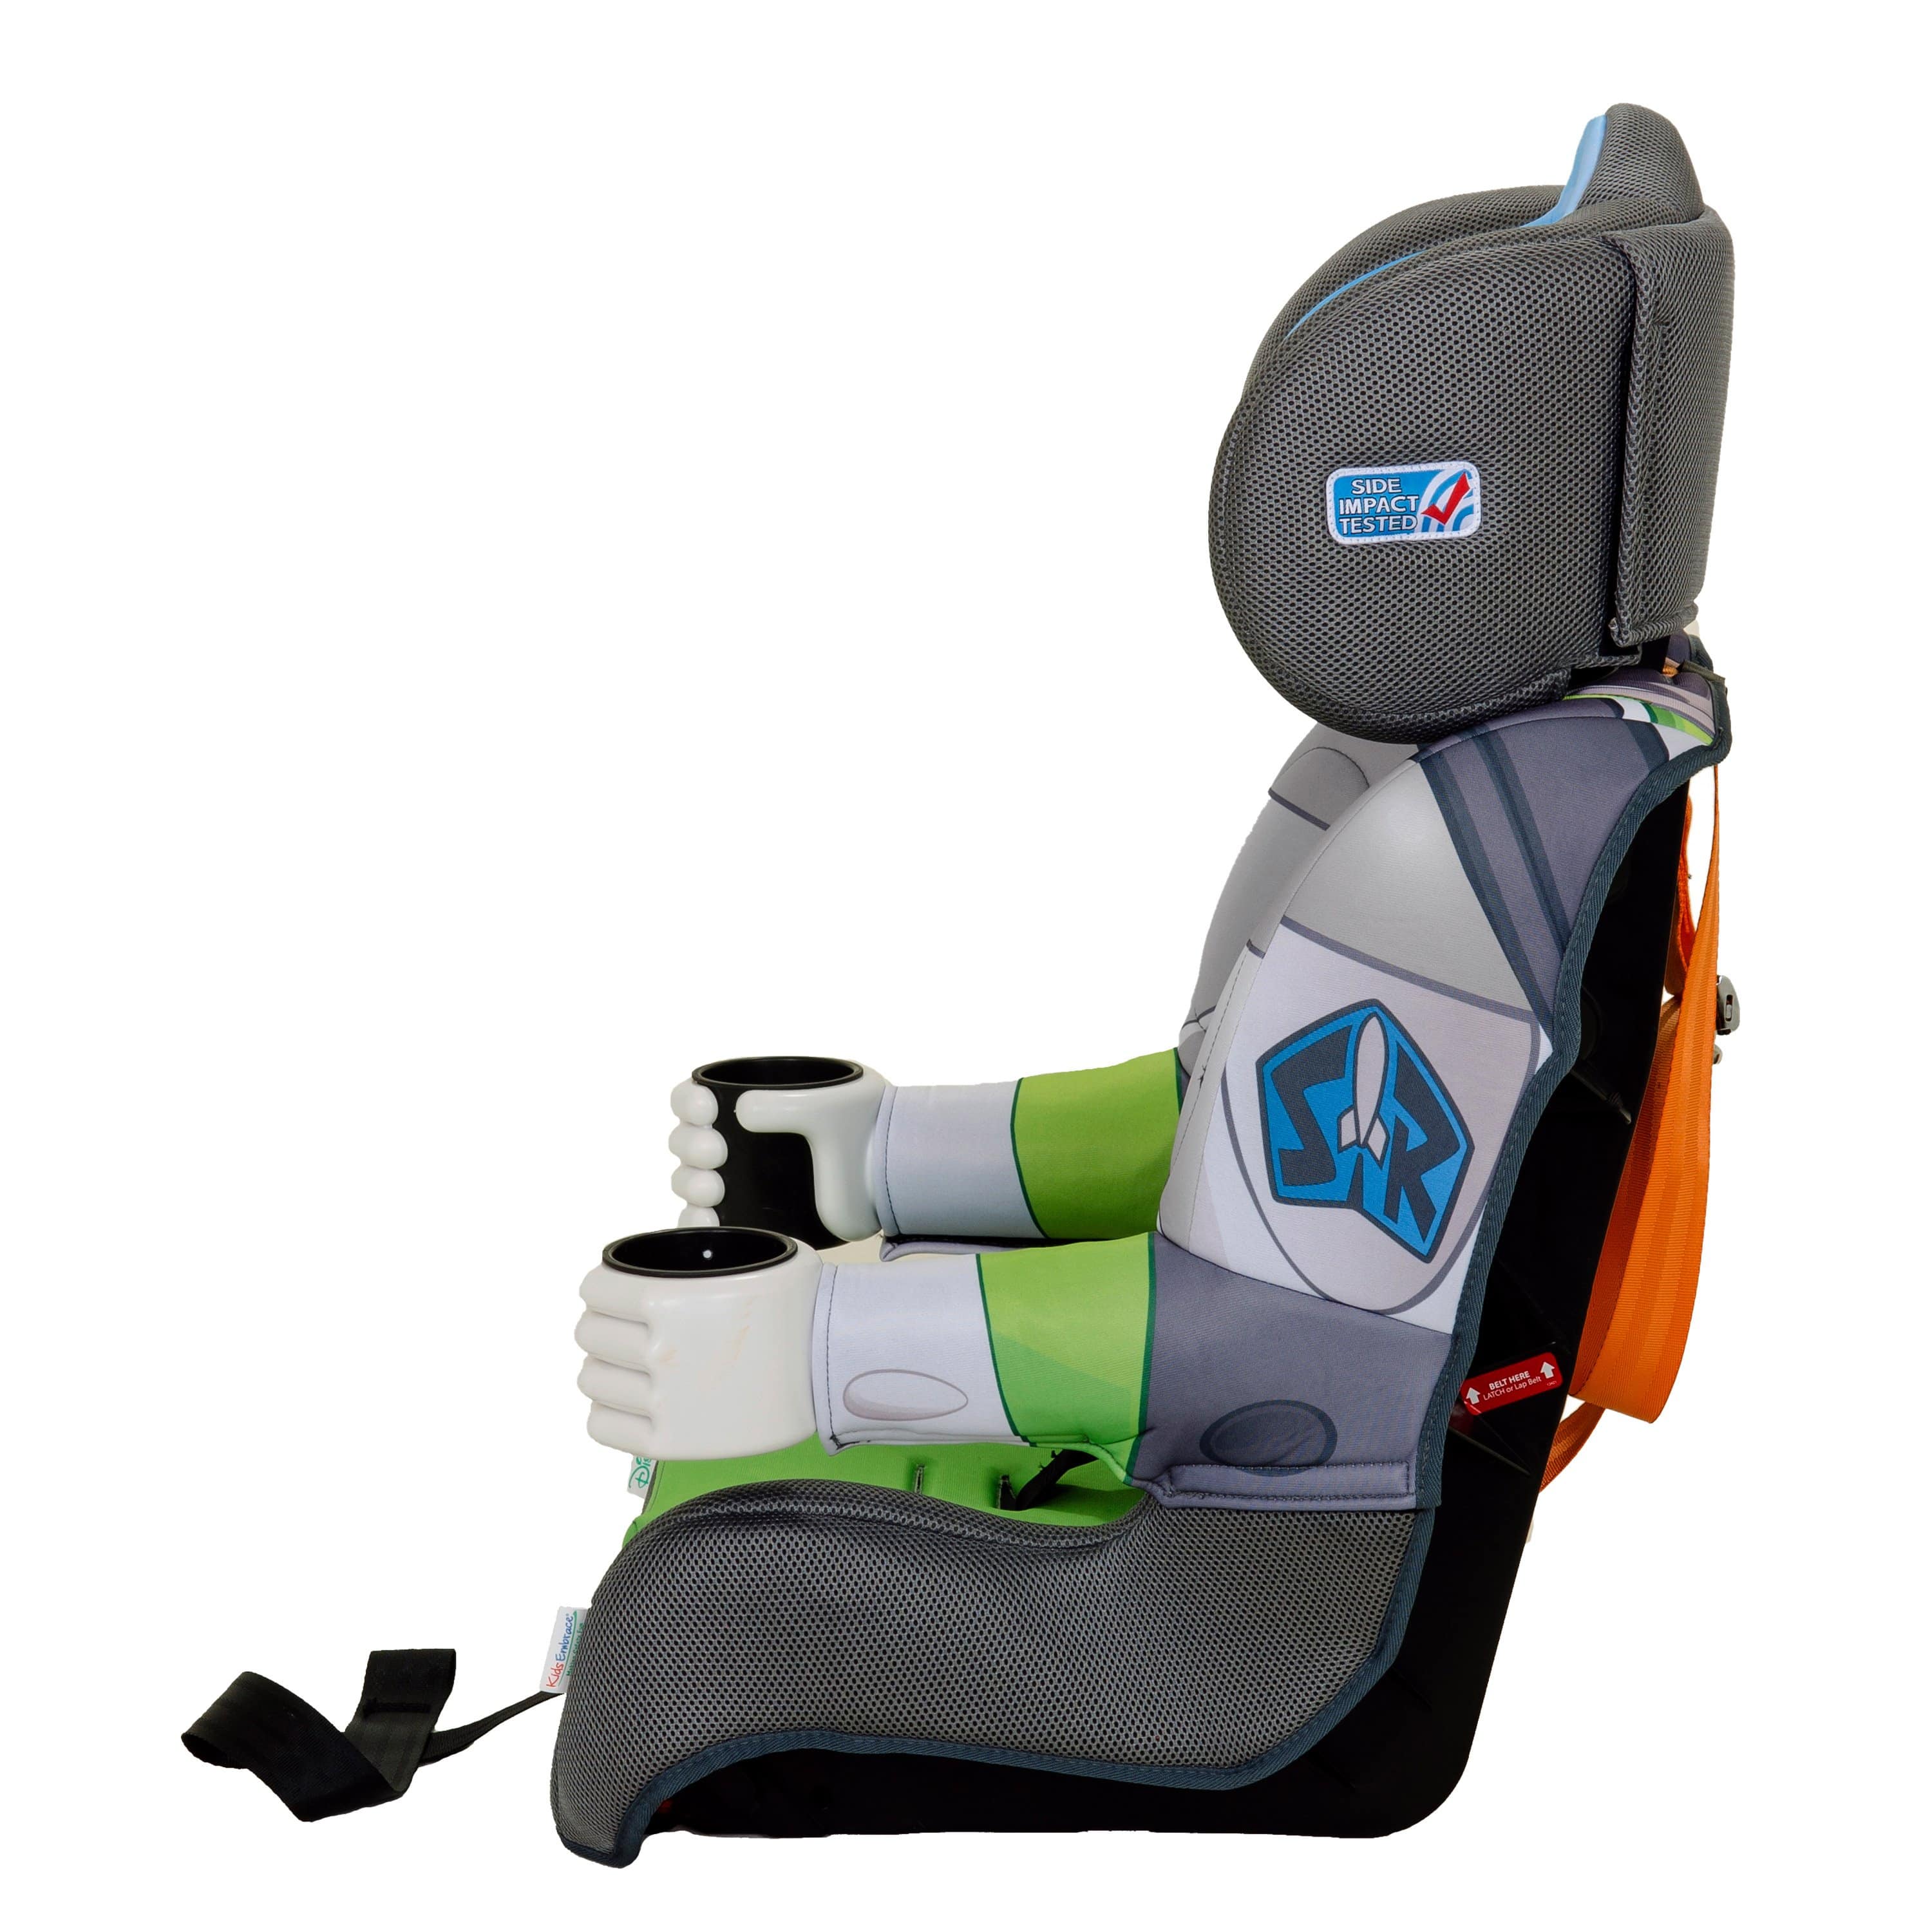 Buzz Lightyear 2-in-1 Harness Booster Car Seat